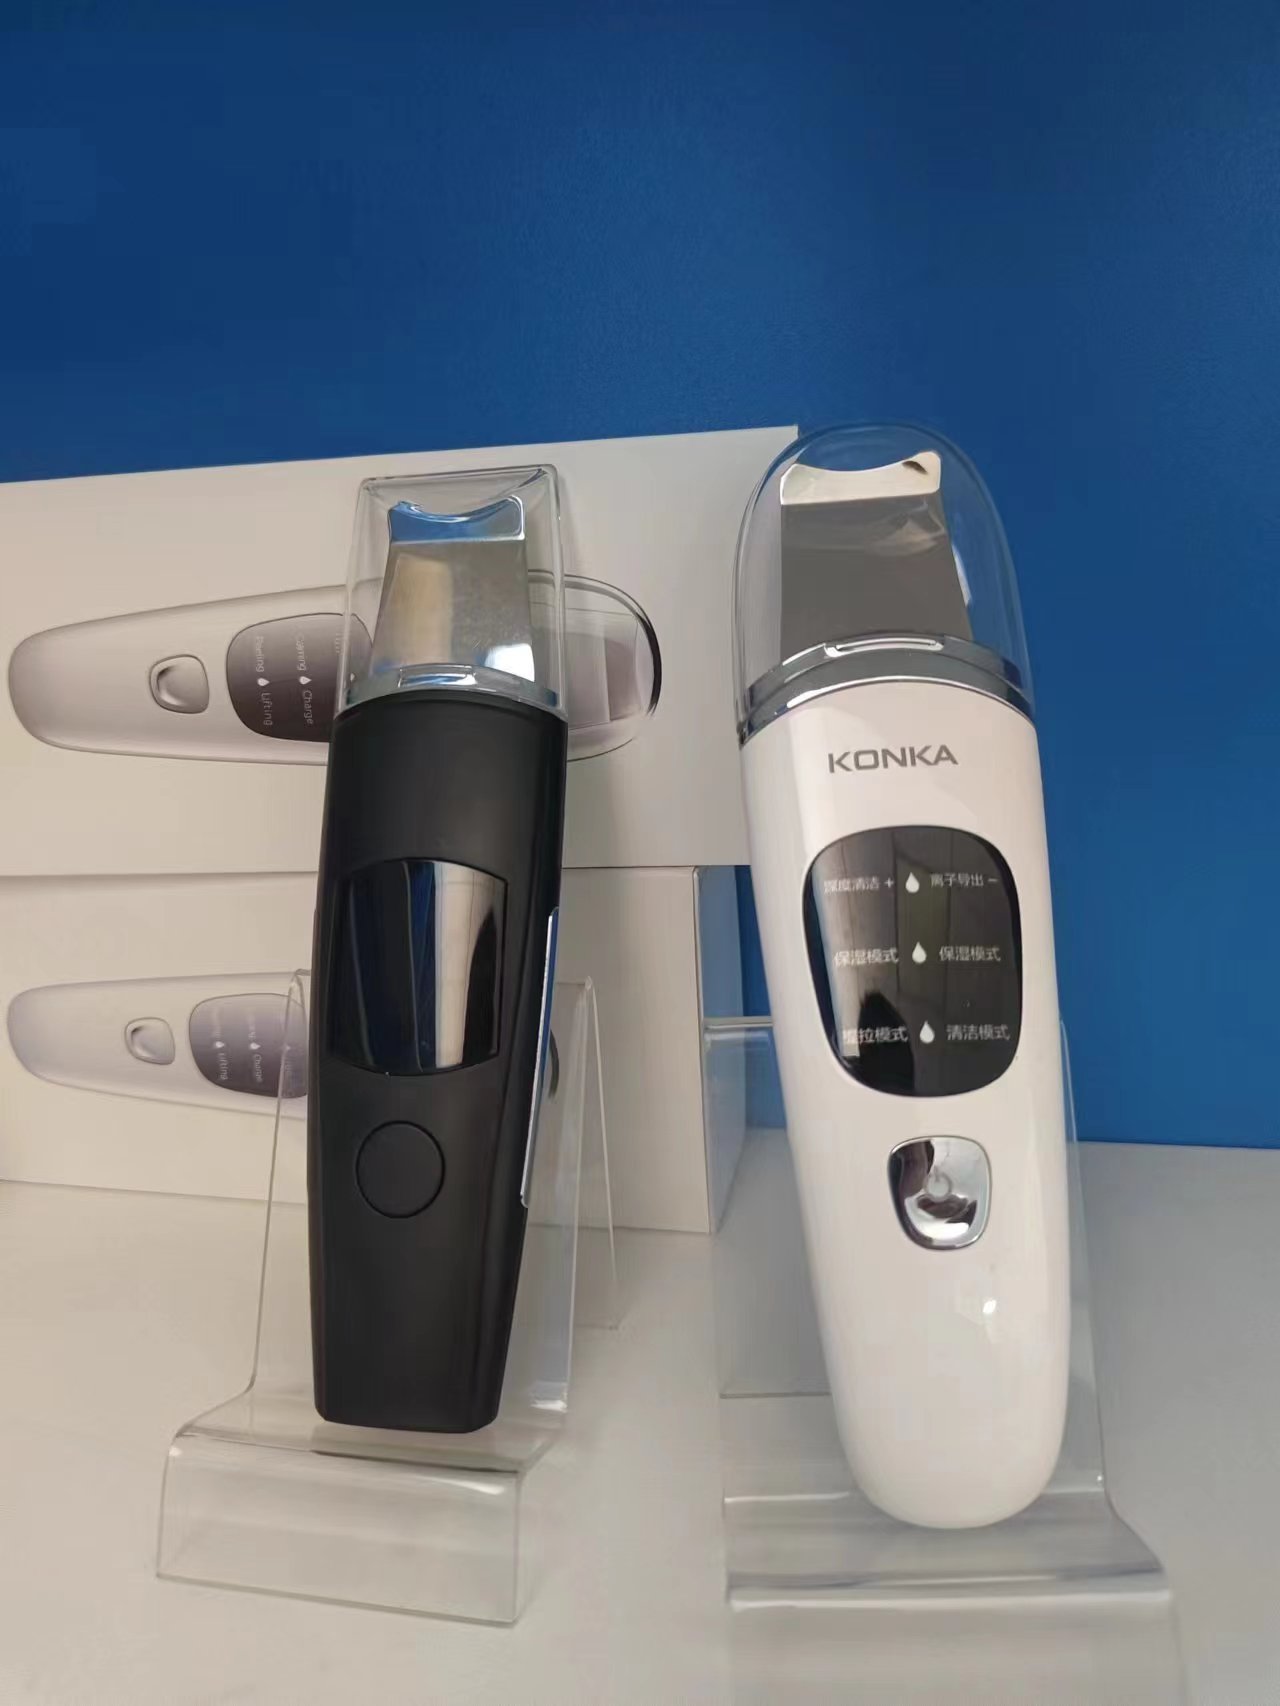 Ultrasonic peeling machine: make your skin clean, smooth and firm